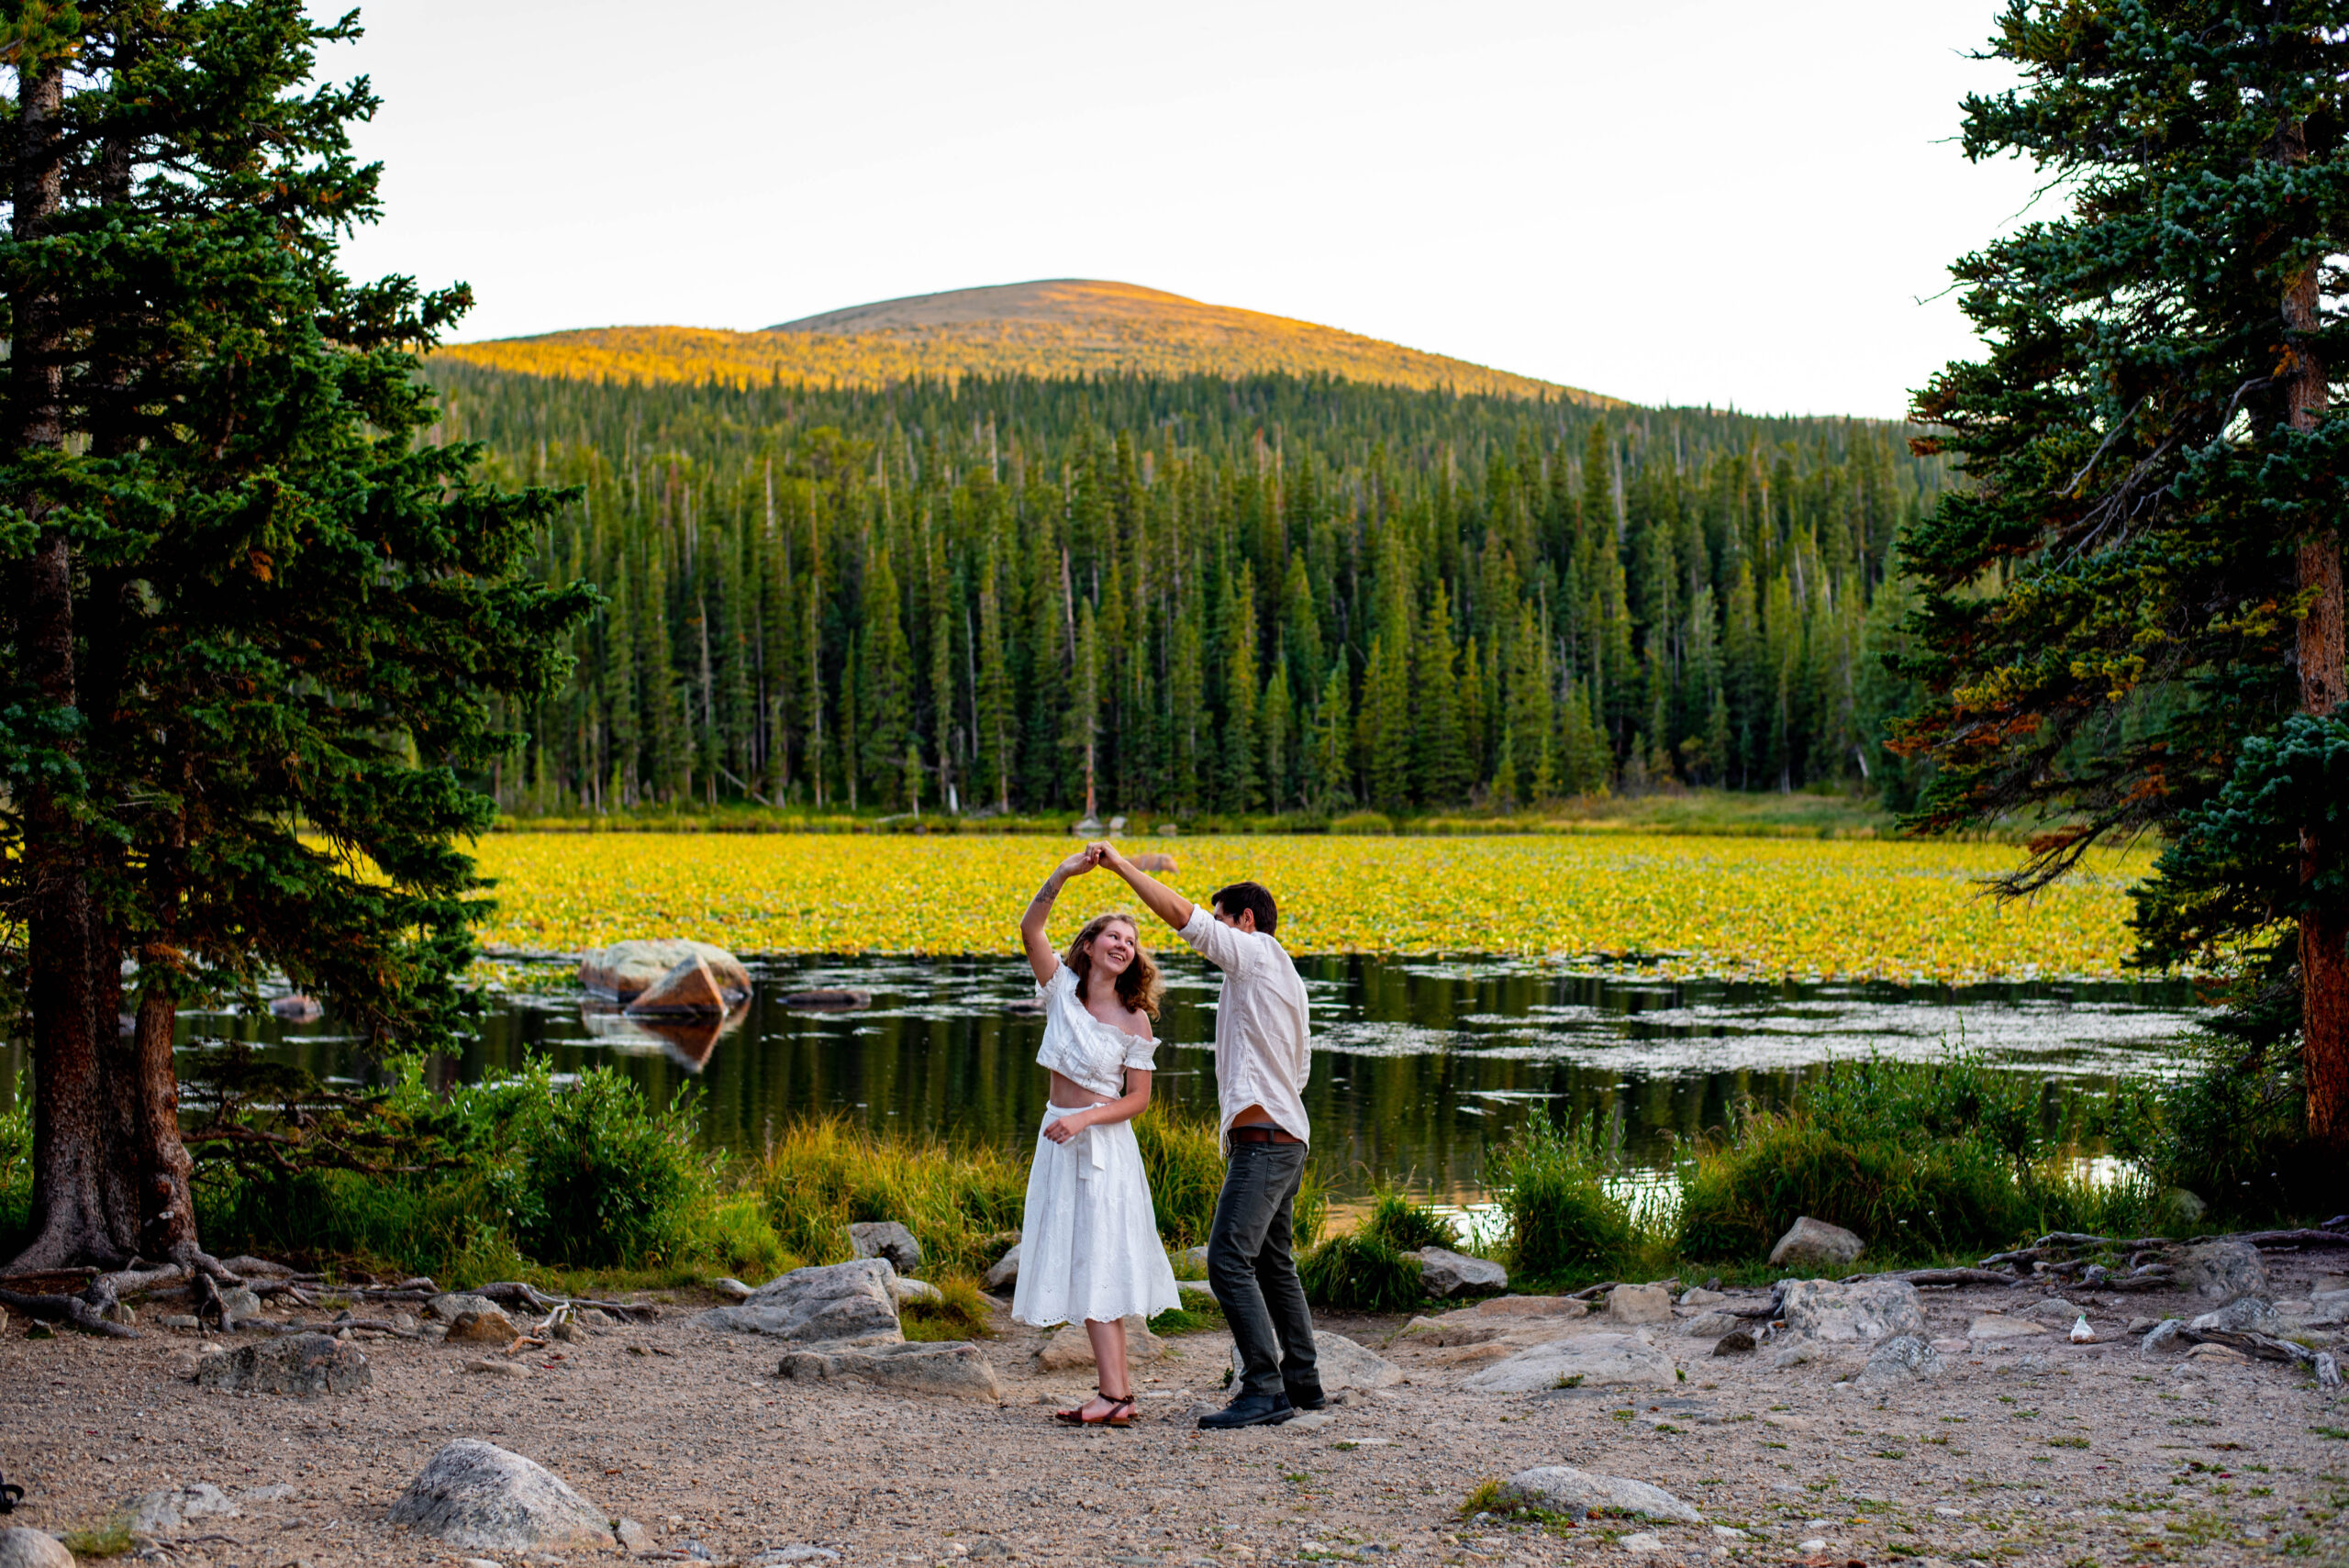 a Colorado engagement photographer captures an image of a man spinning a woman in a white dress in front of an alpine lake.